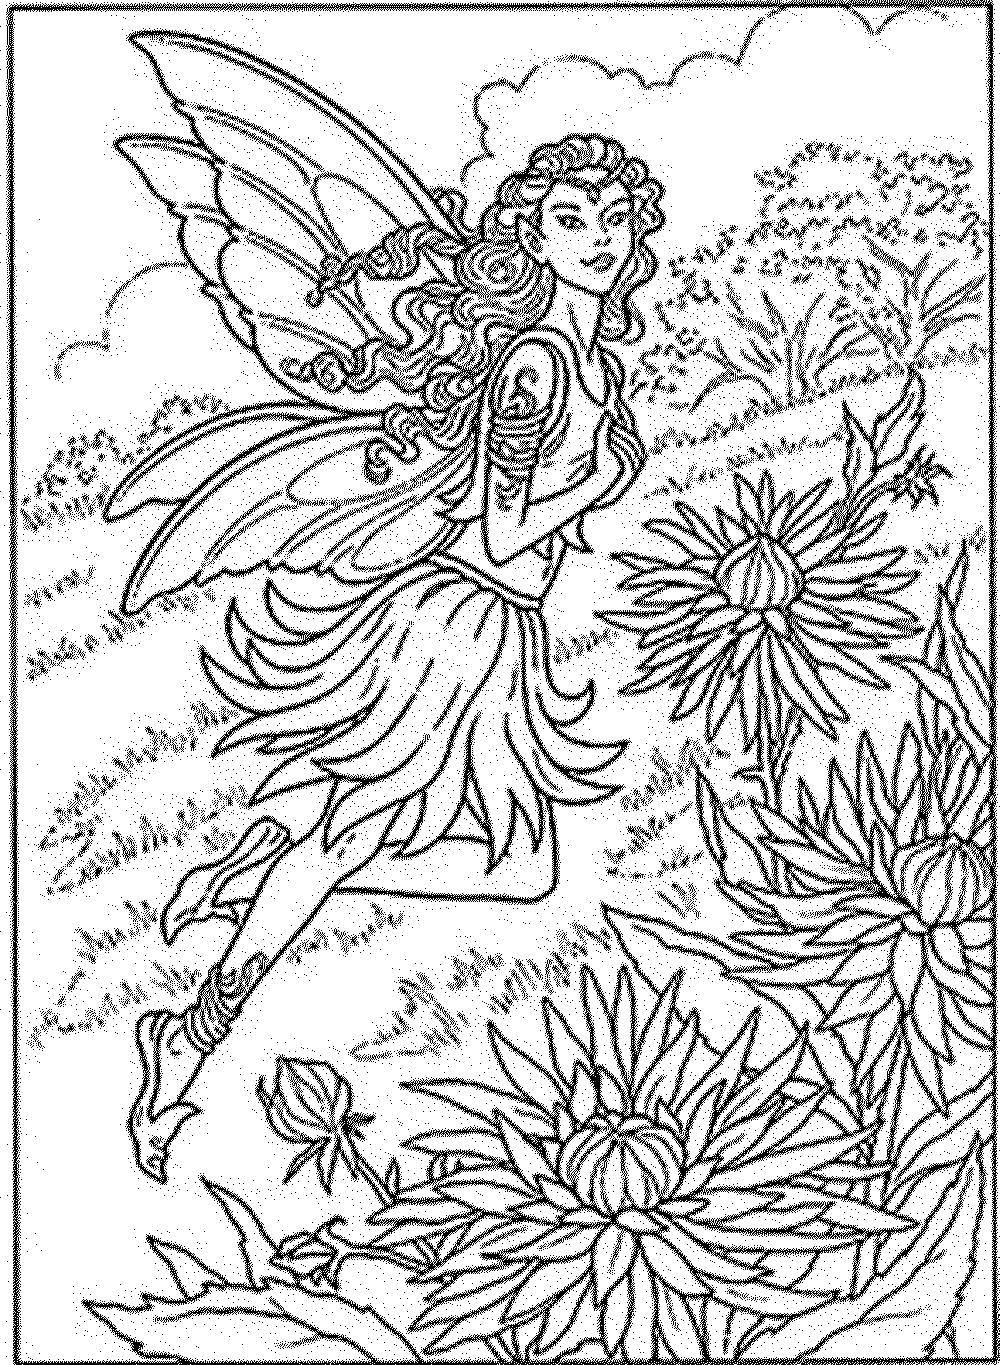 Coloring Fairy flying over flower meadow. Category fairy. Tags:  fairy.